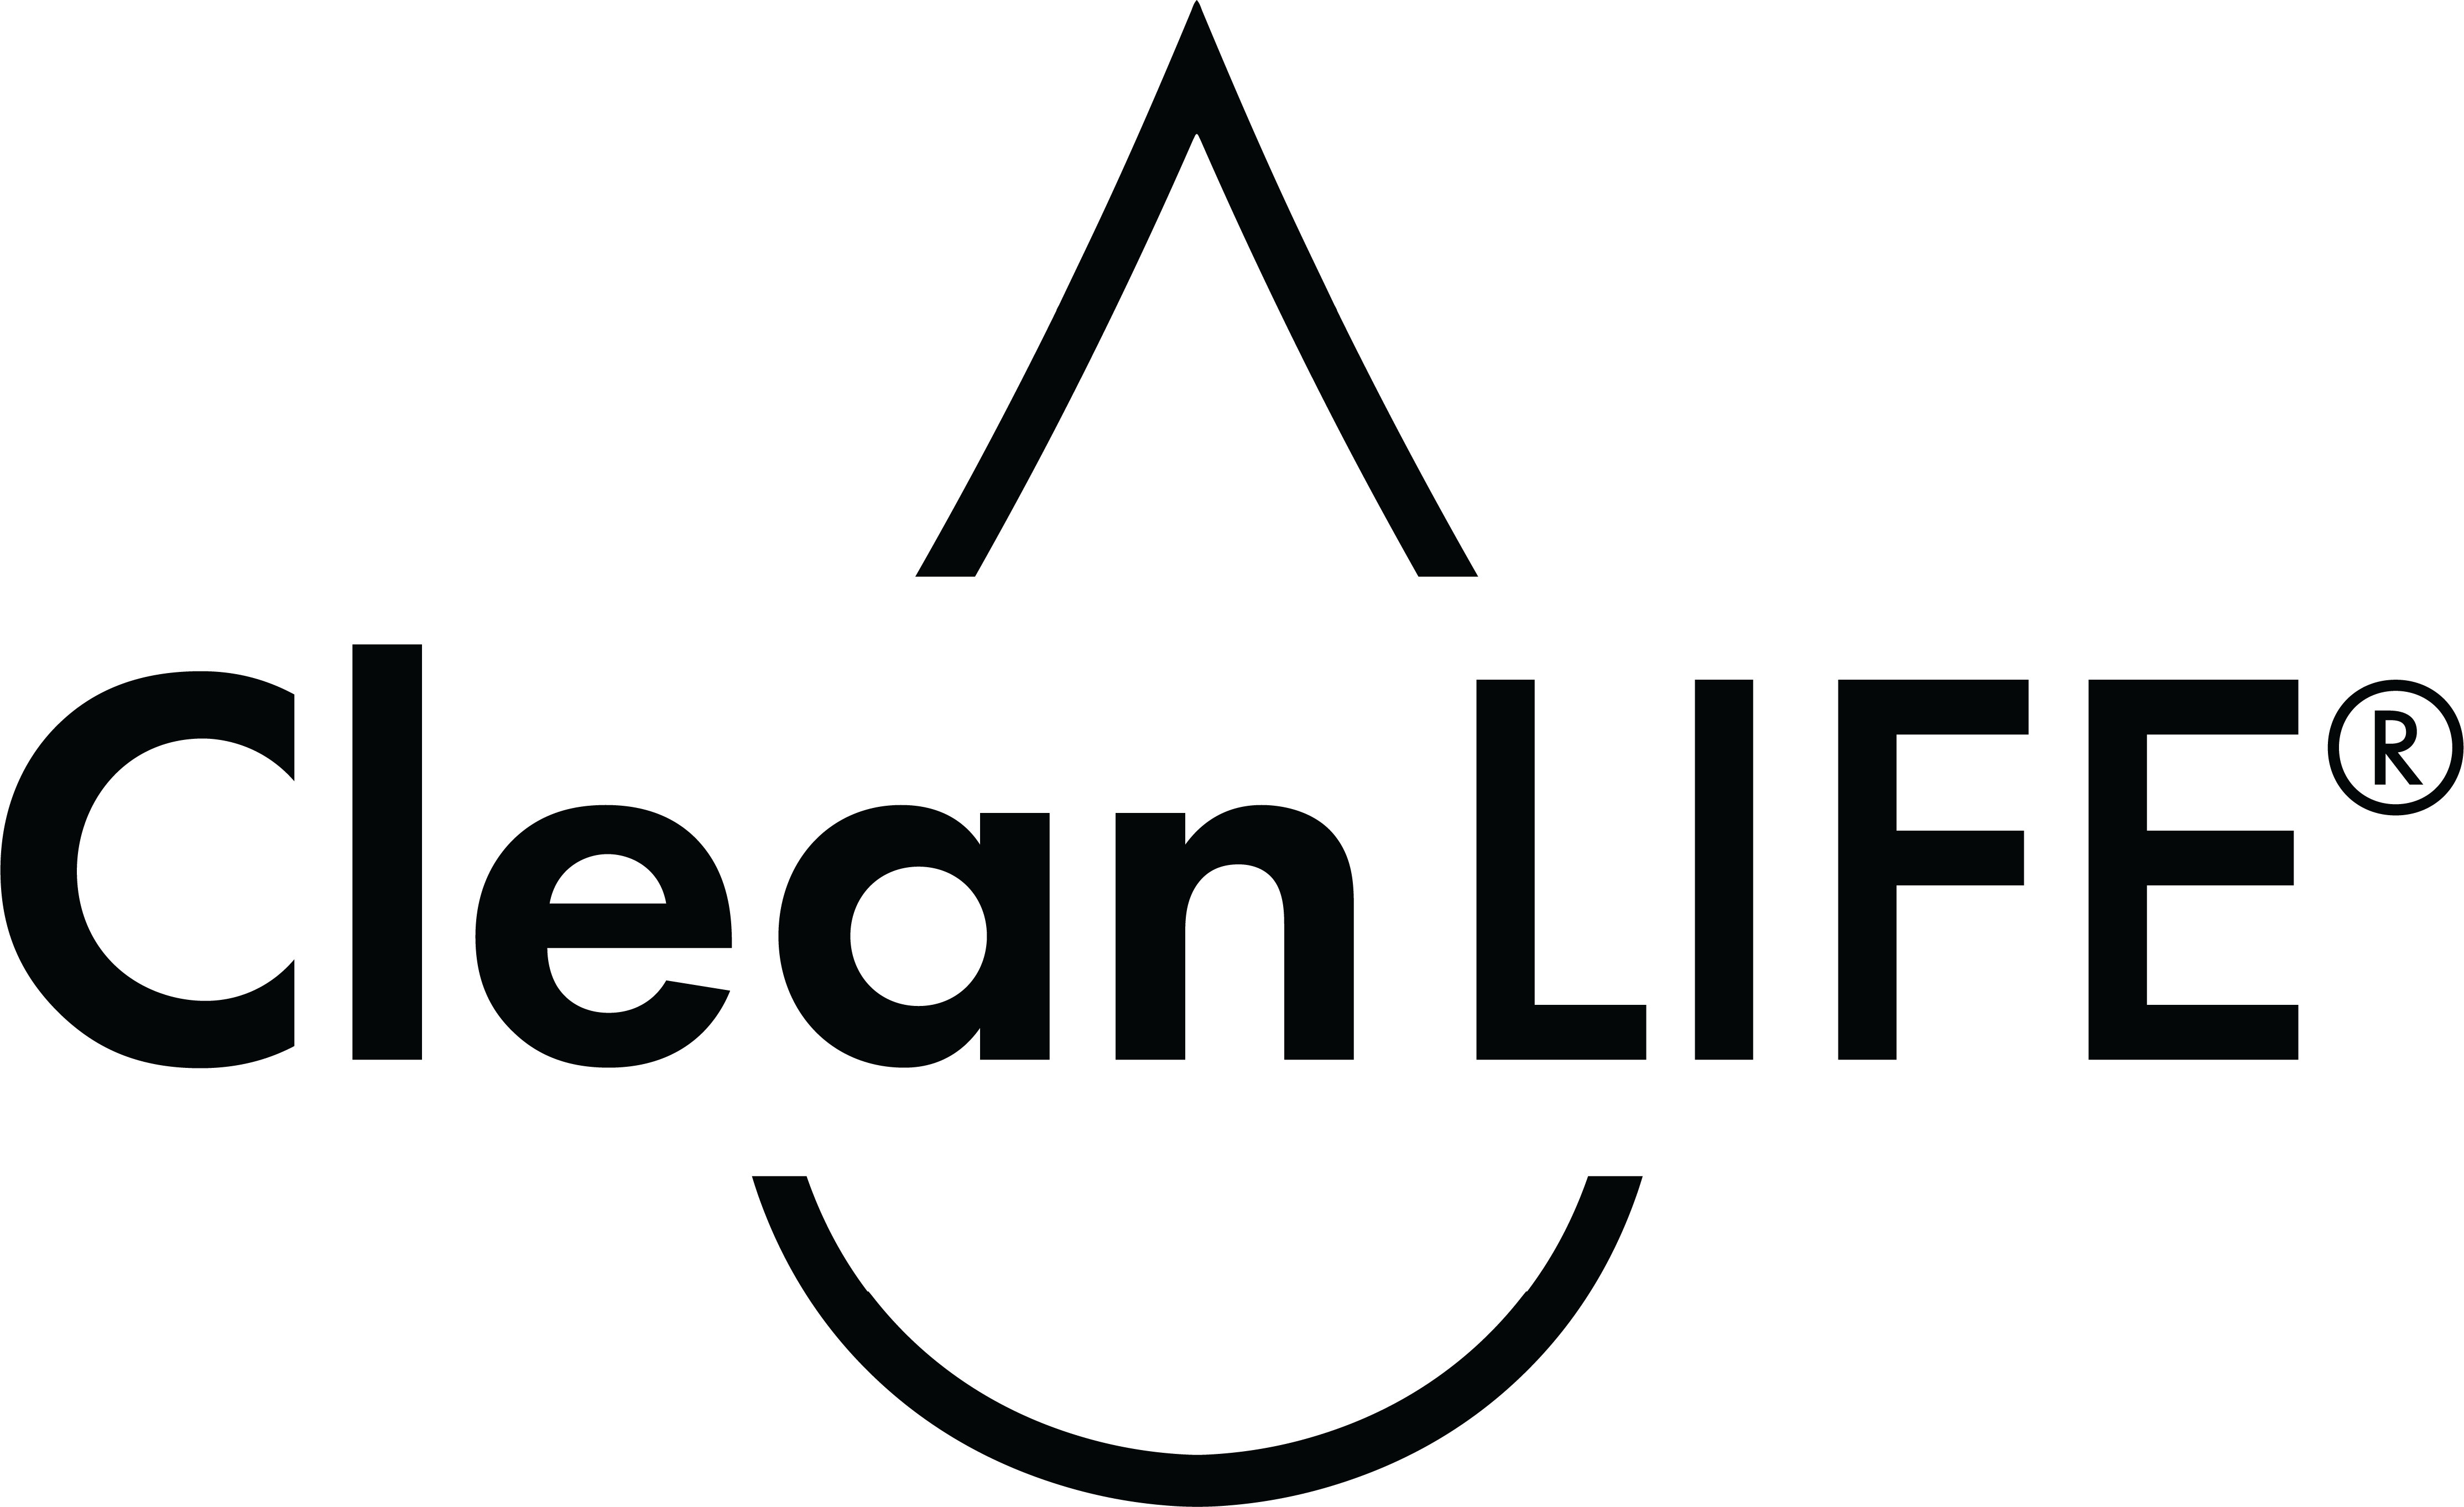 CleanLIFE - We make them here in Australia